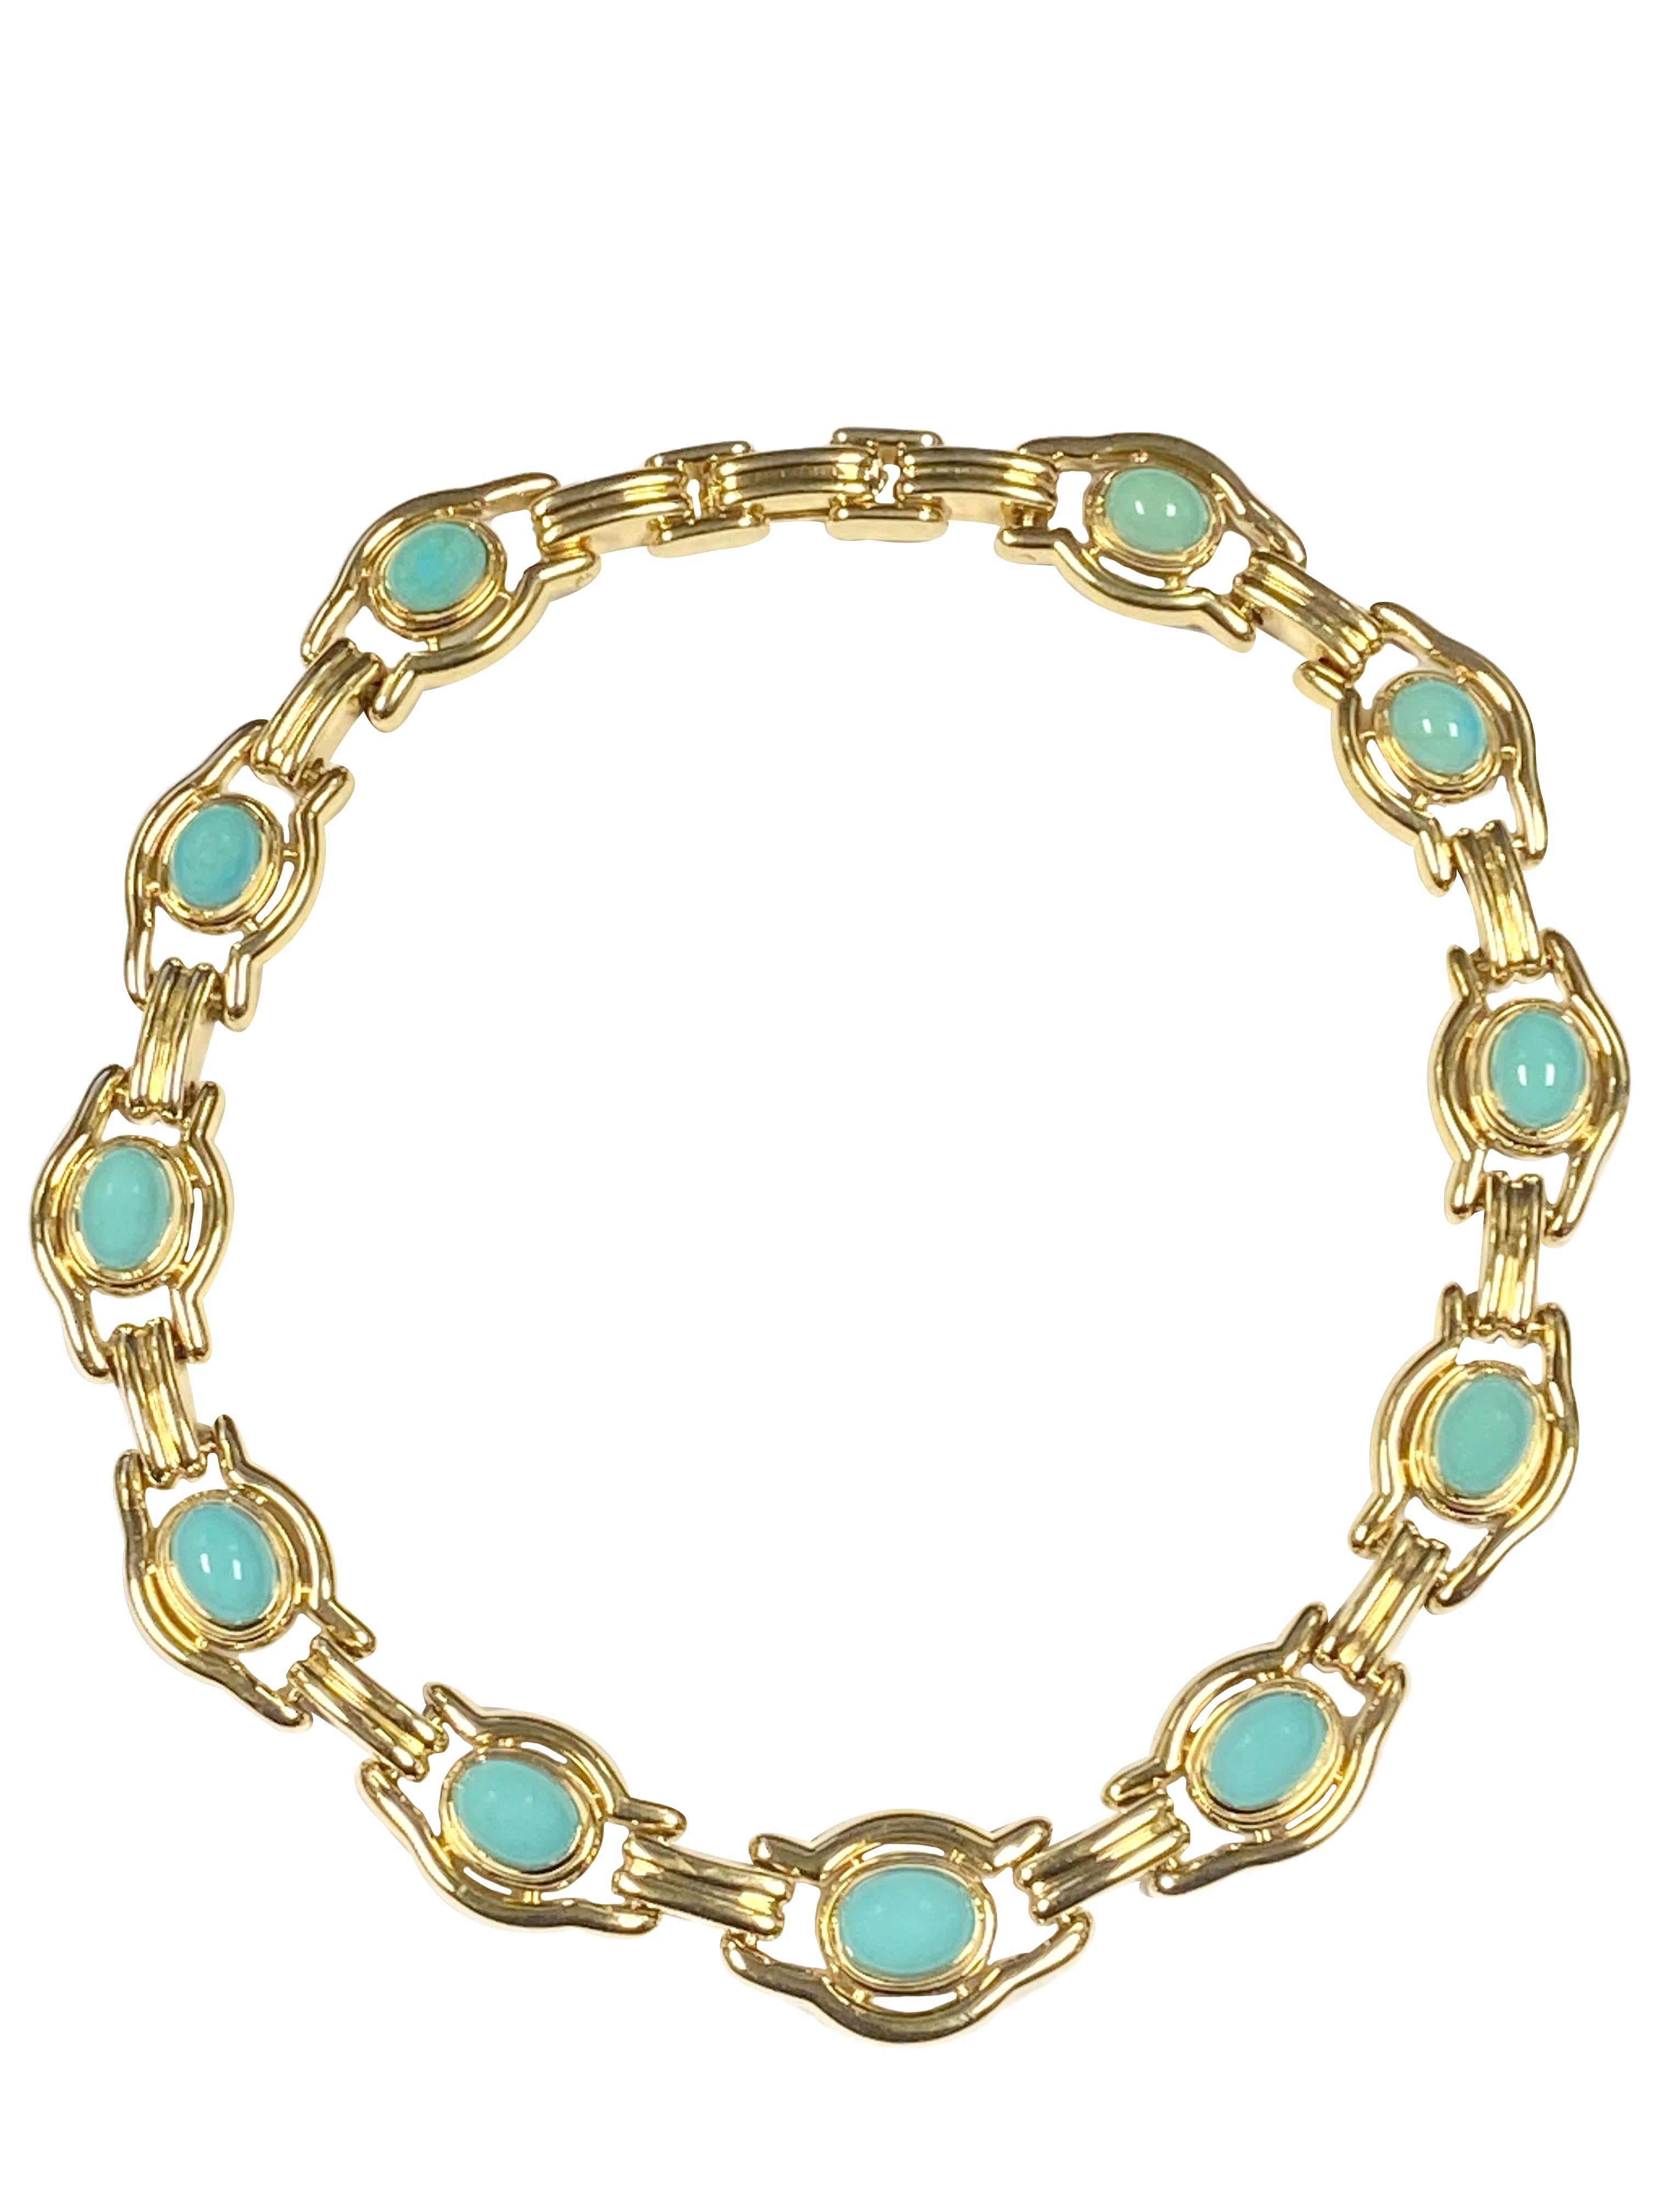 yellow turquoise necklace